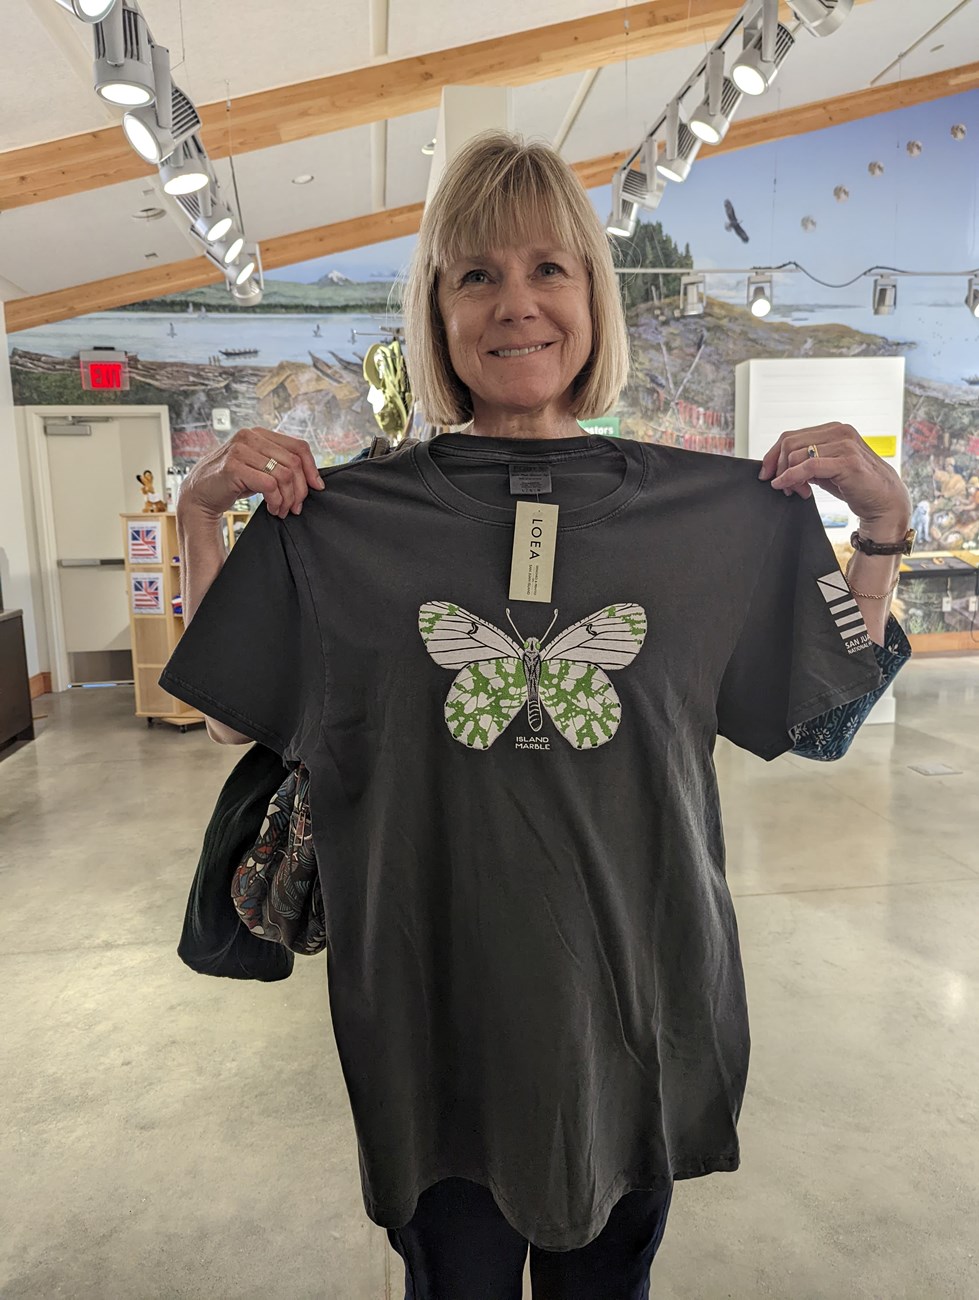 A woman proudly displays a tee shirt featuring an island marble butterfly